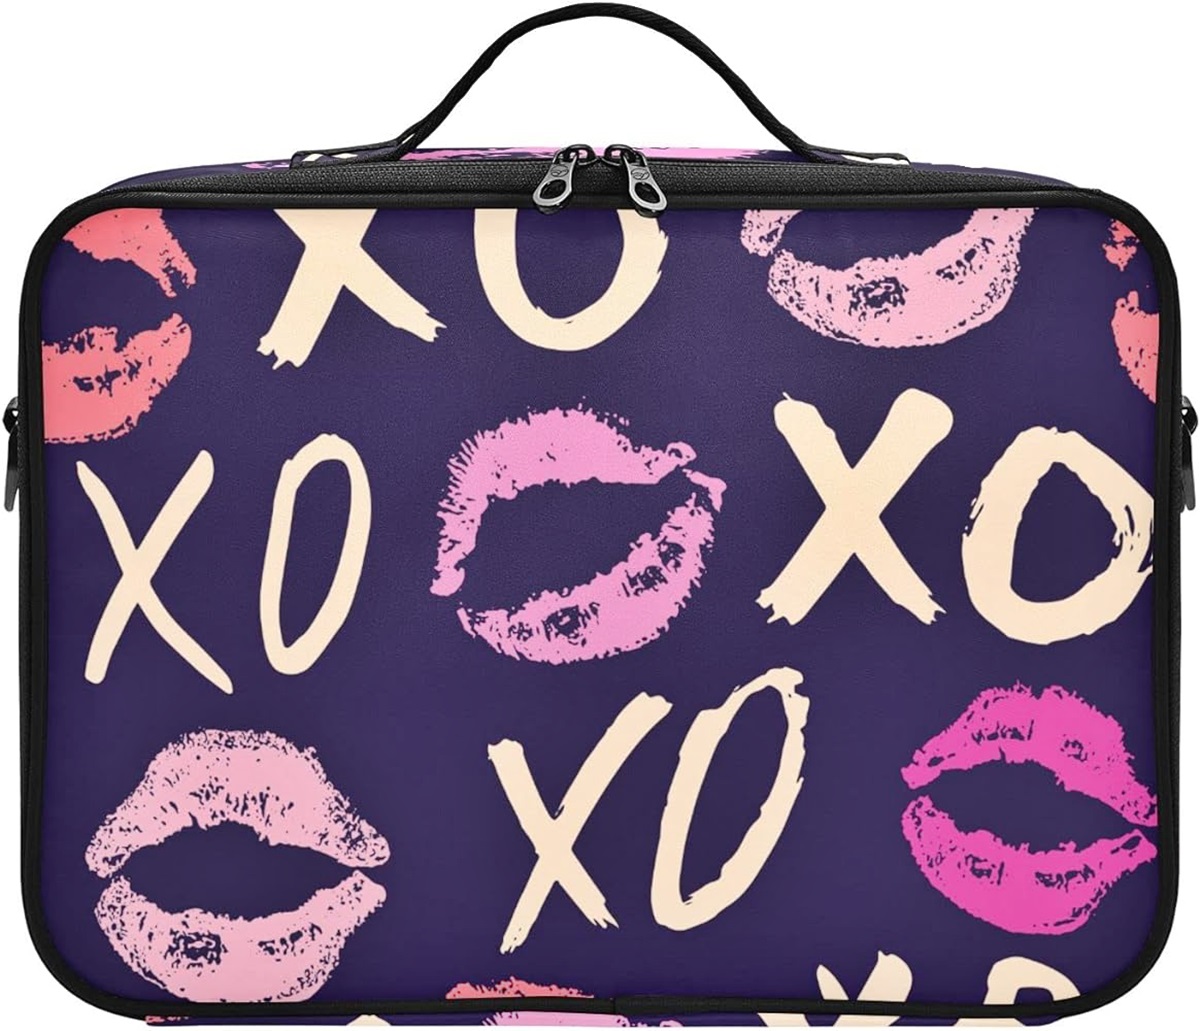 Xoxo Love Kiss And Muah Red Woman Lips Makeup Bag Cosmetic Bags Toiletry  Travel Organizer for Women, Portable Storage Organzier for Cosmetics, Make  Up